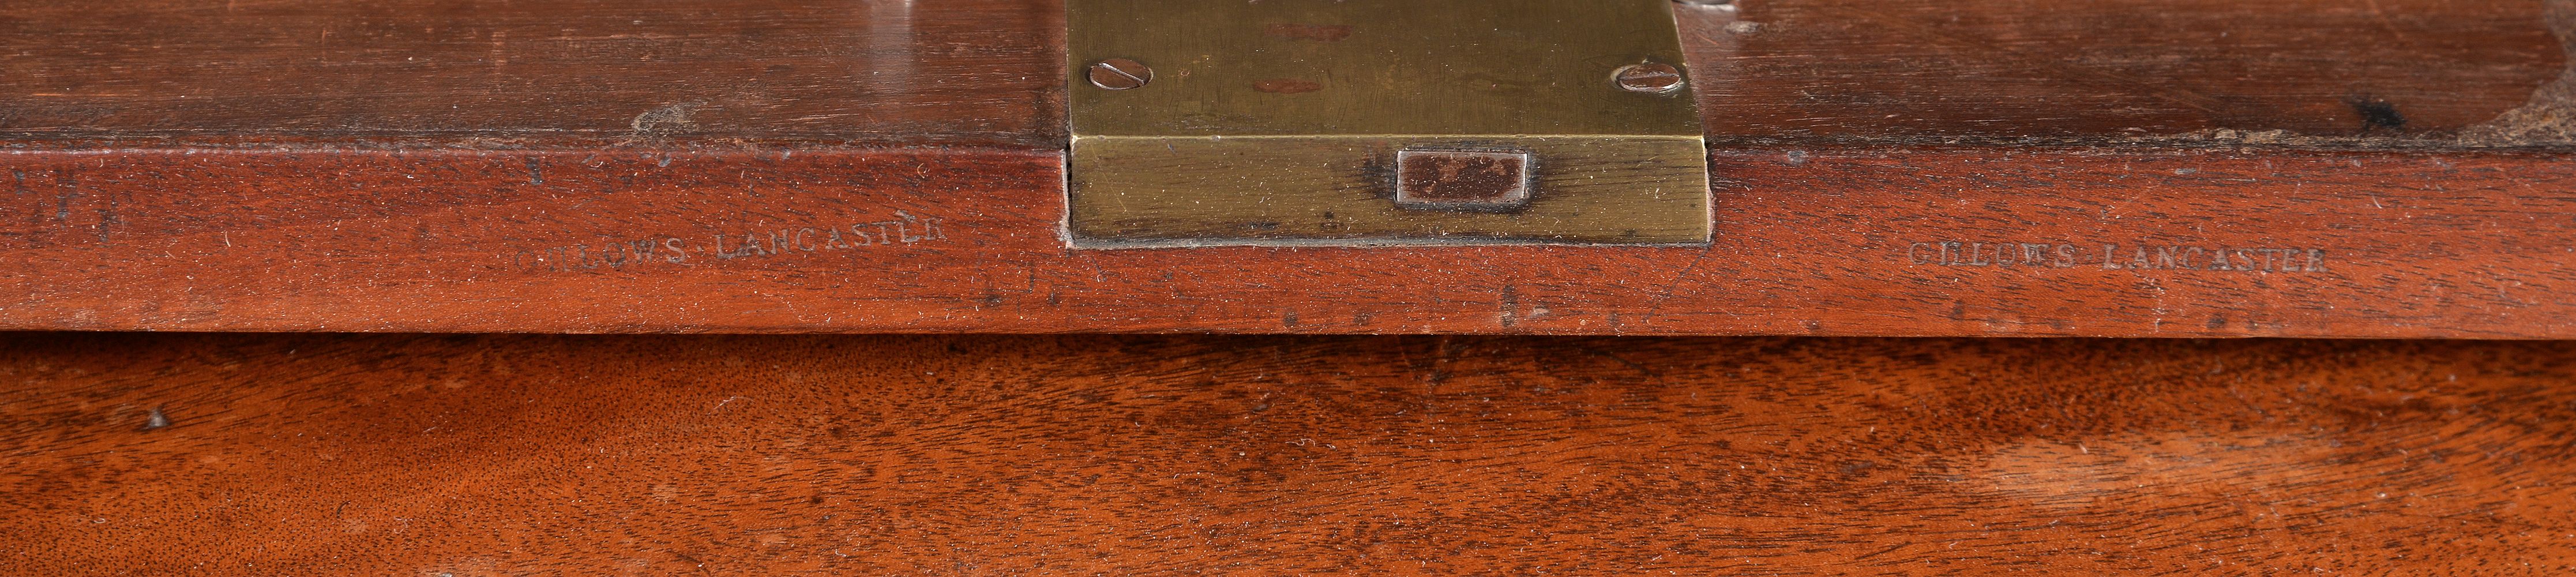 A George III mahogany chest of drawers - Image 2 of 3